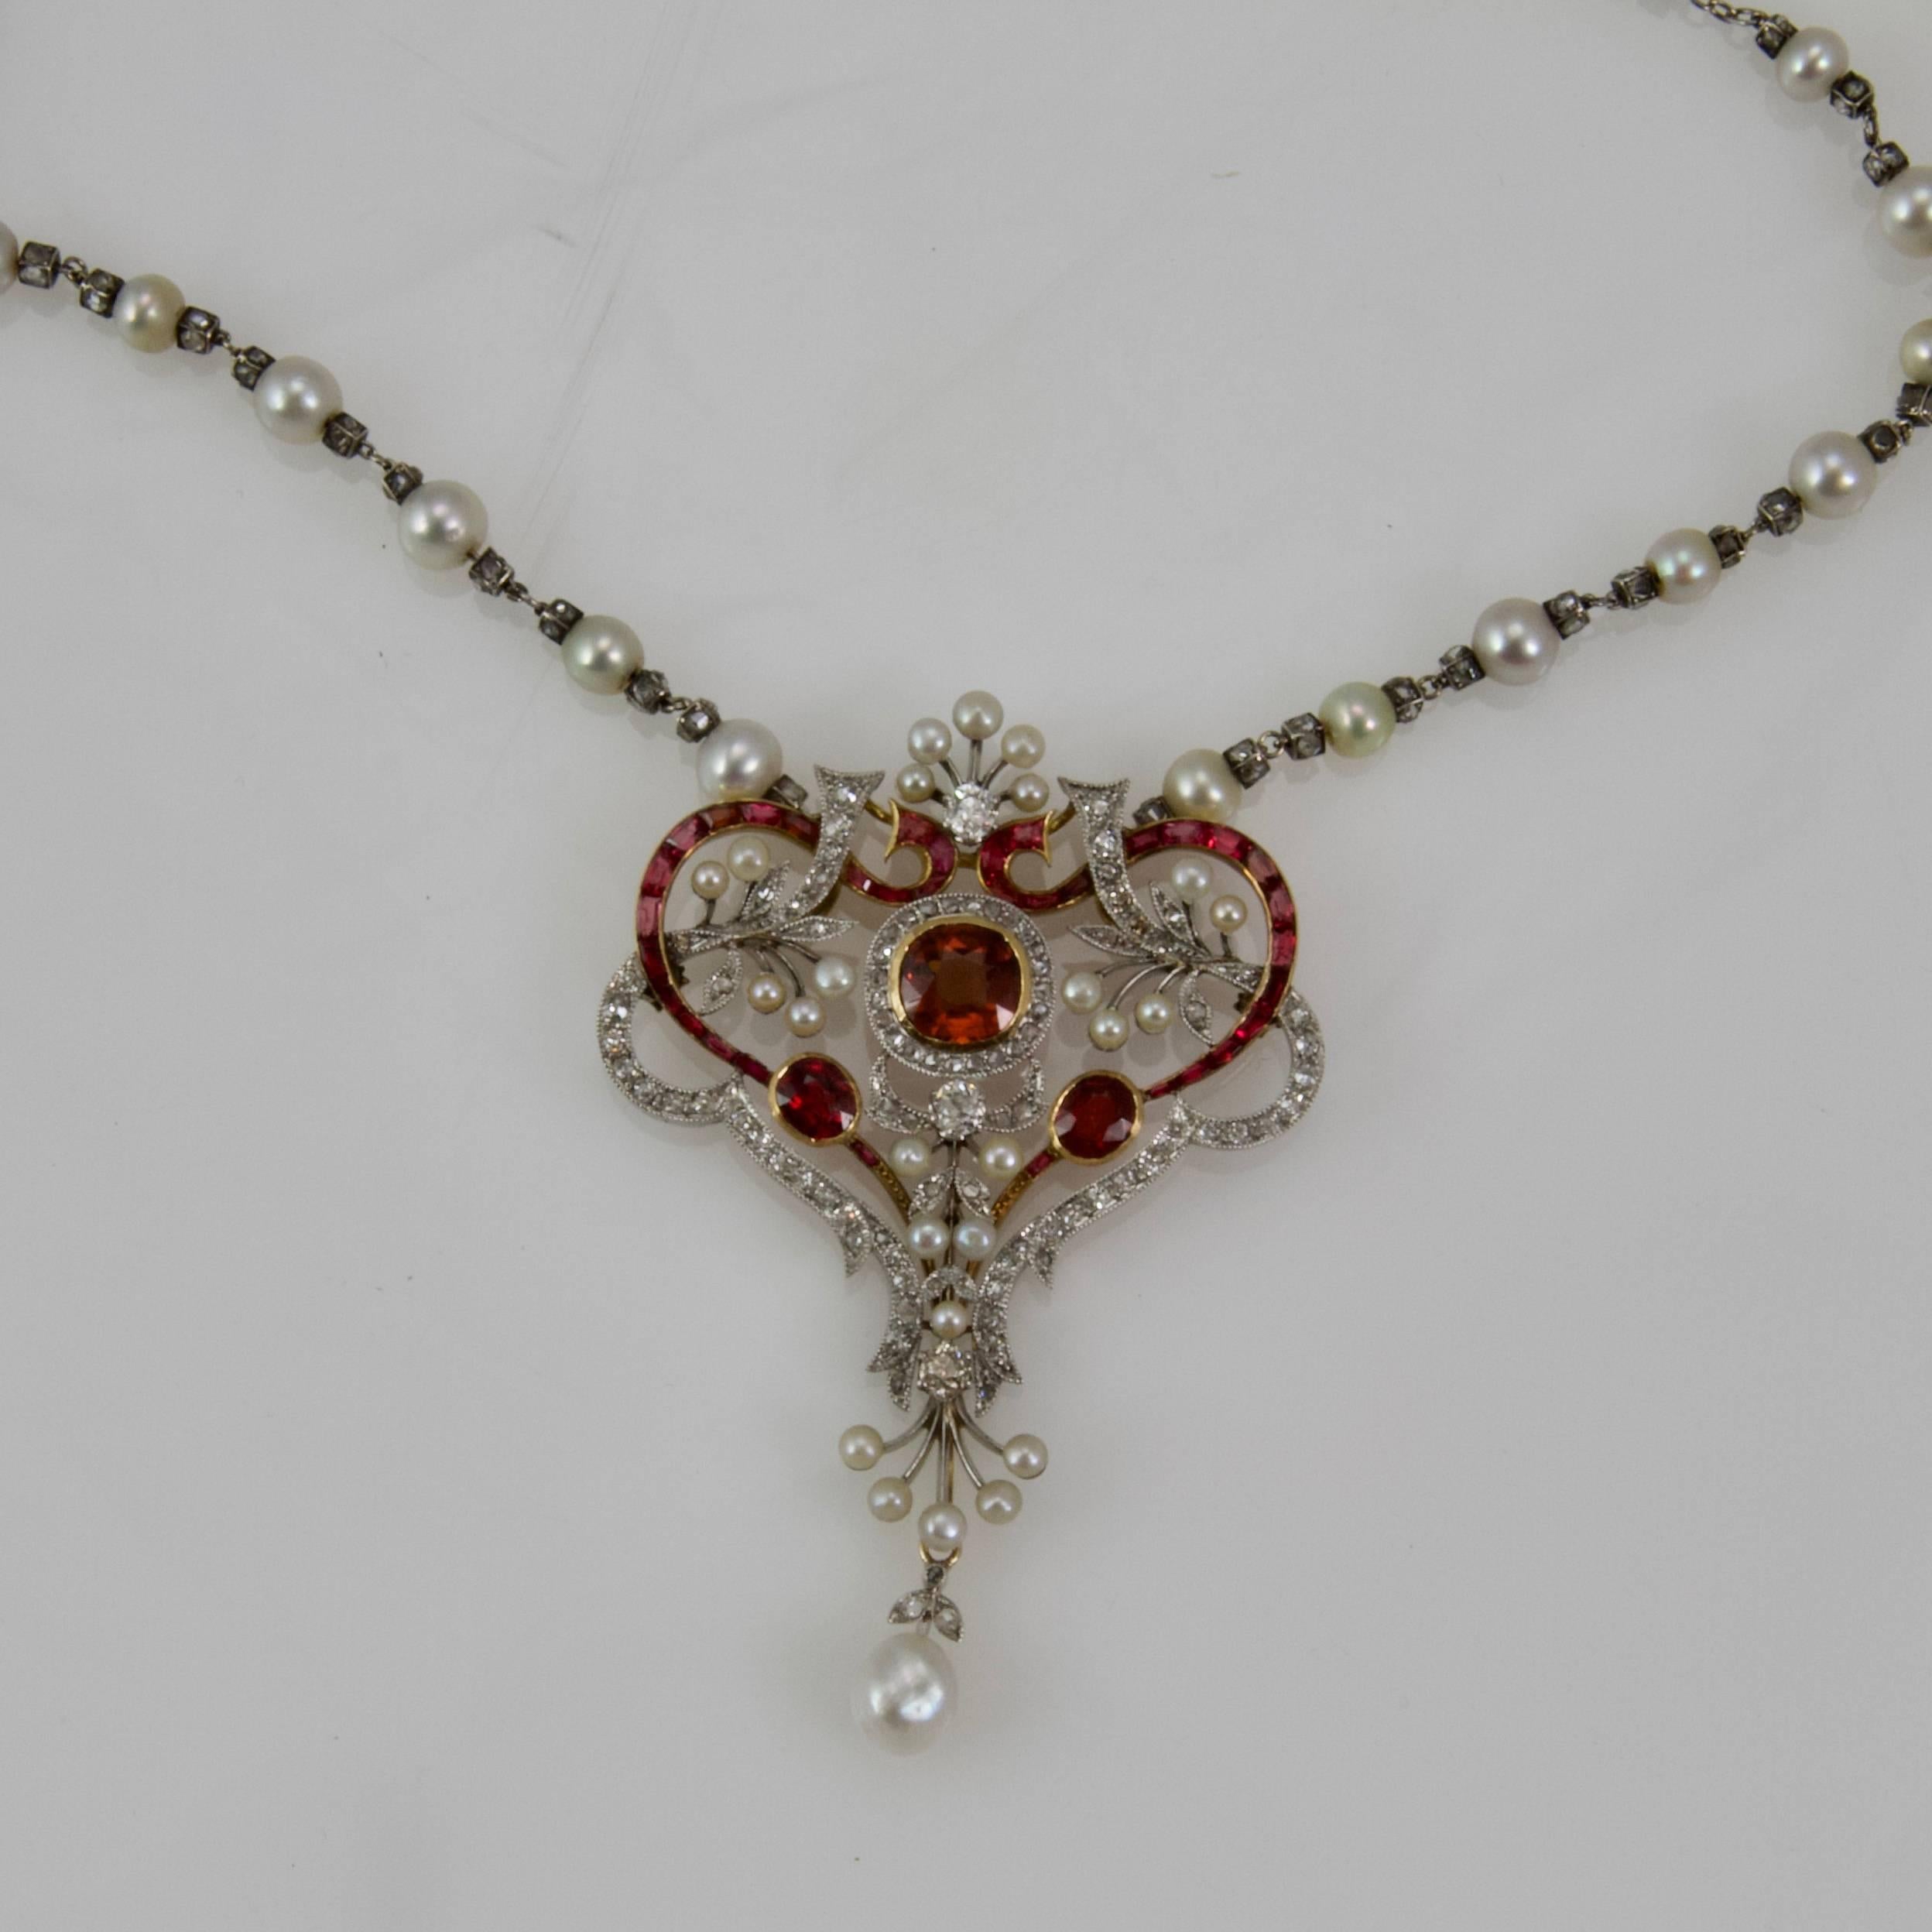 Pendent and its chain typically of Belle Epoque Period. 
Designed with heart and leaves pattern interlaced. 
The main stone is a spinelle red orangy. 
Overall set in 